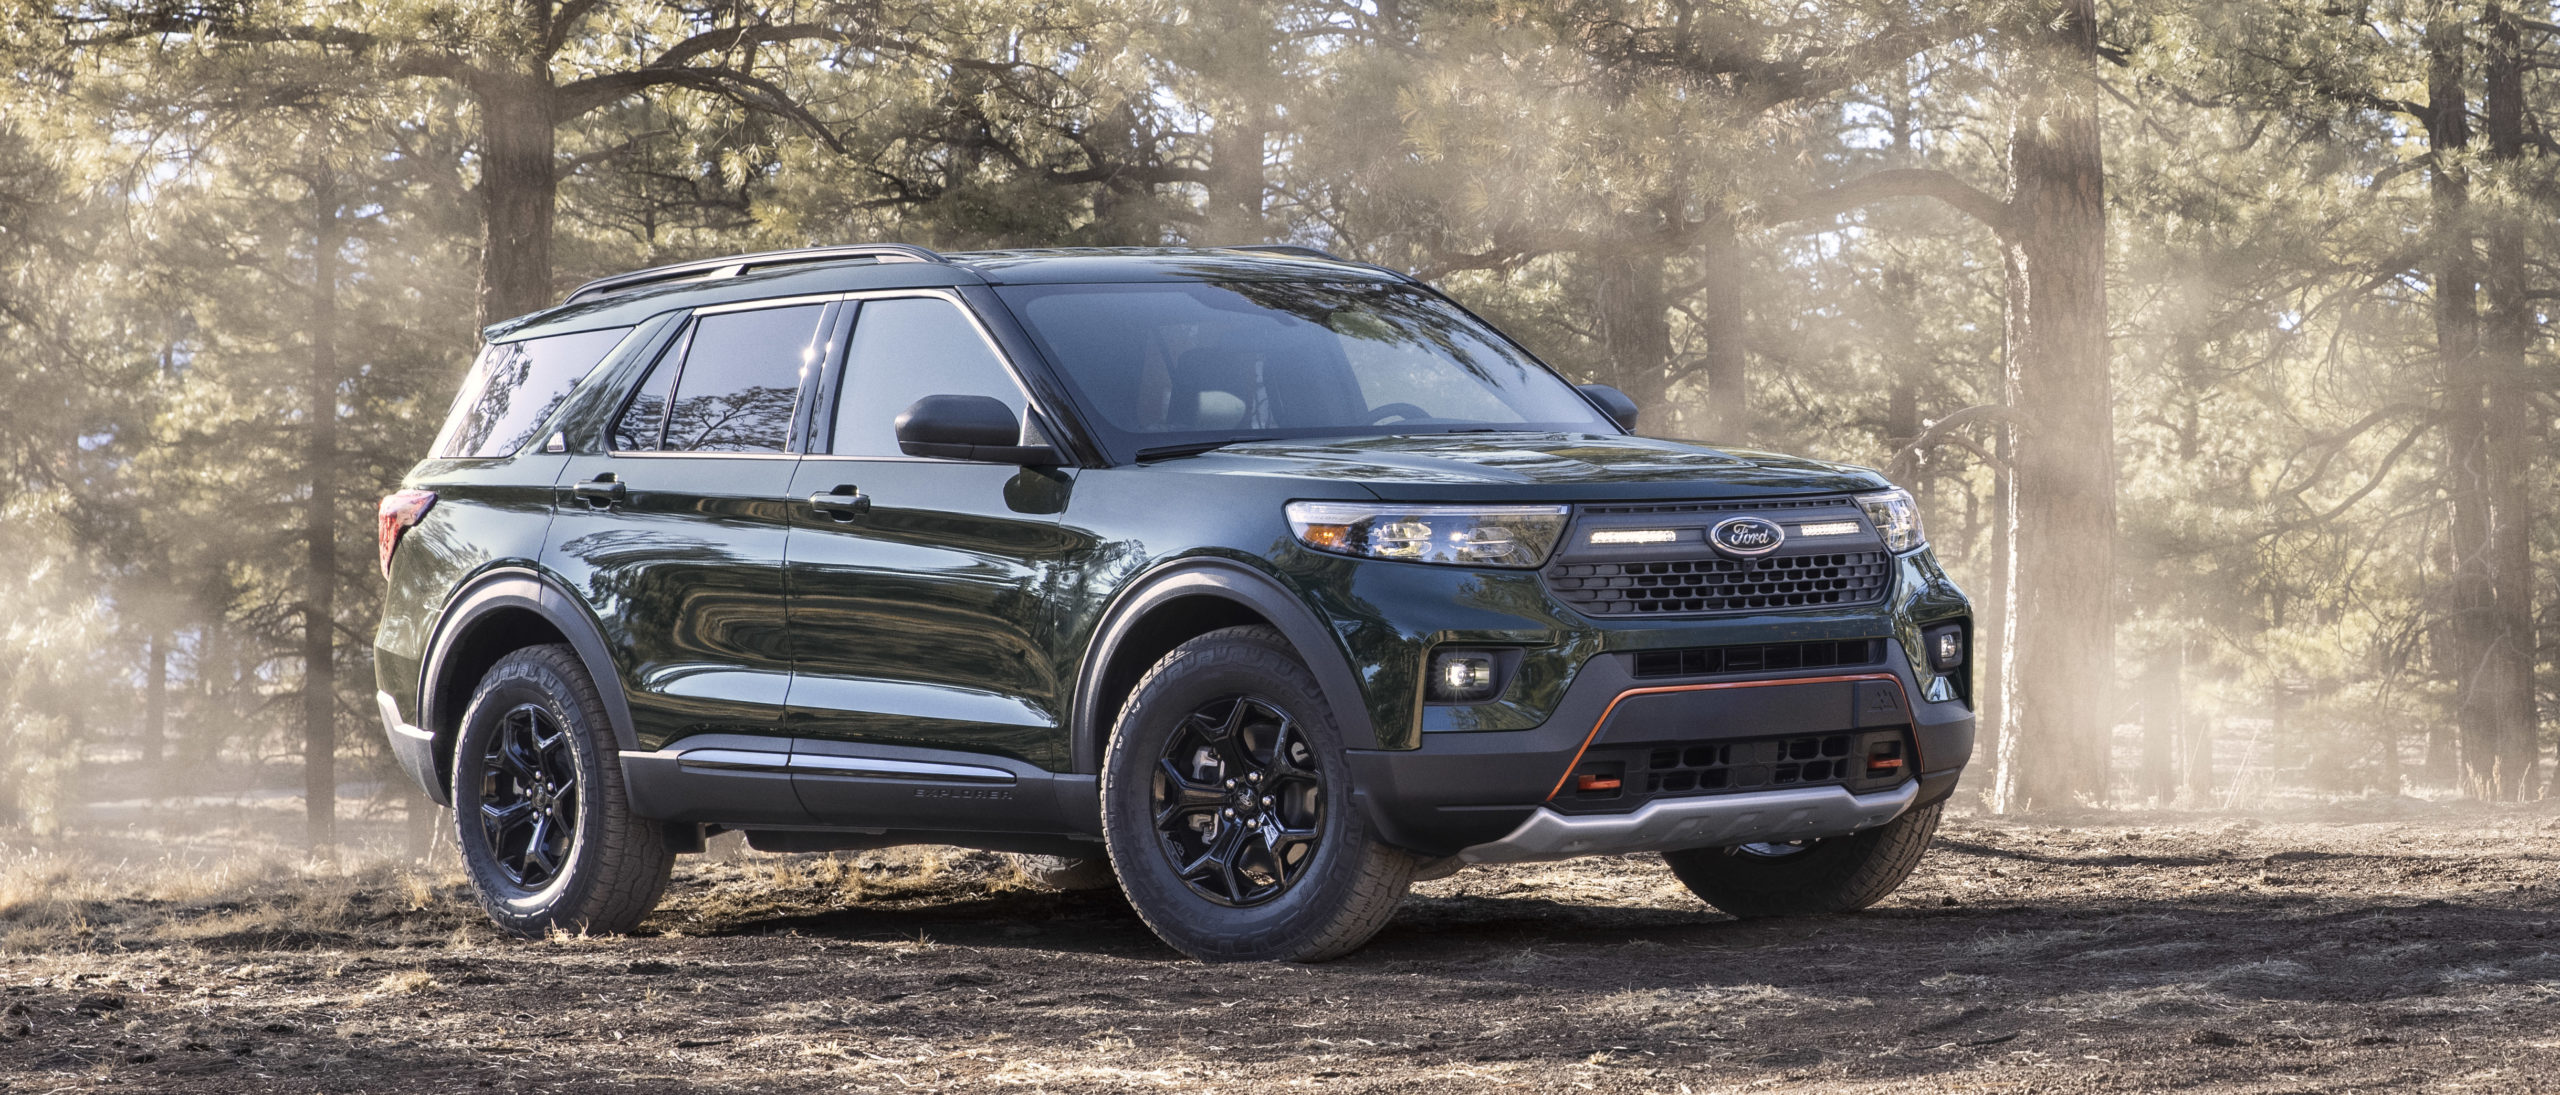 Ford Offers Increased Off-Road Capability with Explorer Timberline | THE SHOP